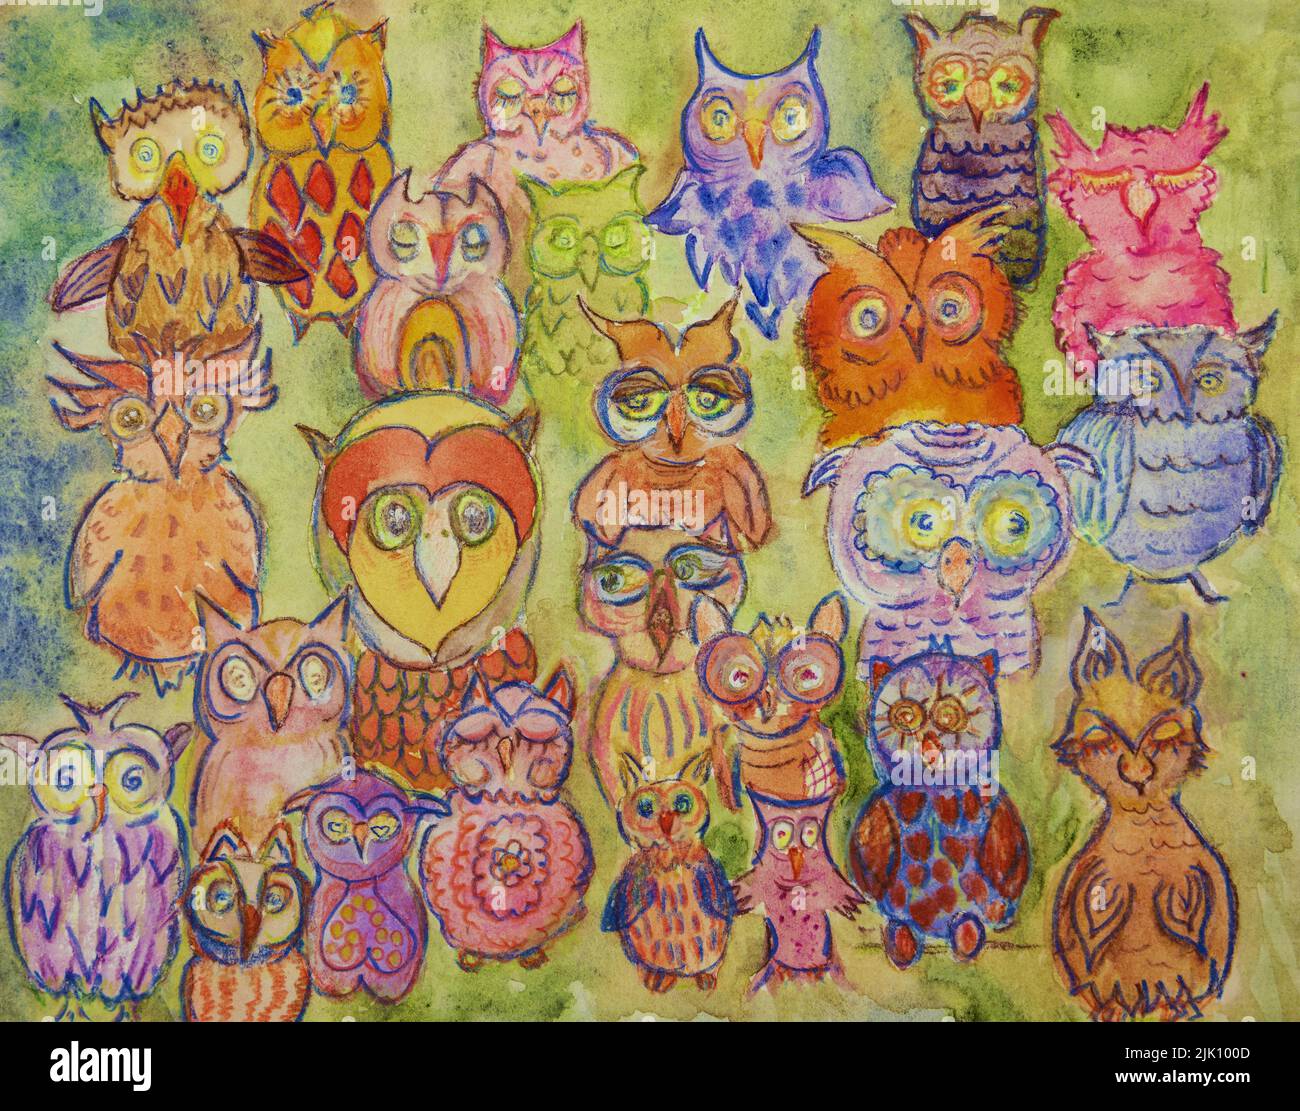 All different whimsical owls. The dabbing technique near the edges gives a soft focus effect due to the altered surface roughness of the paper. Stock Photo